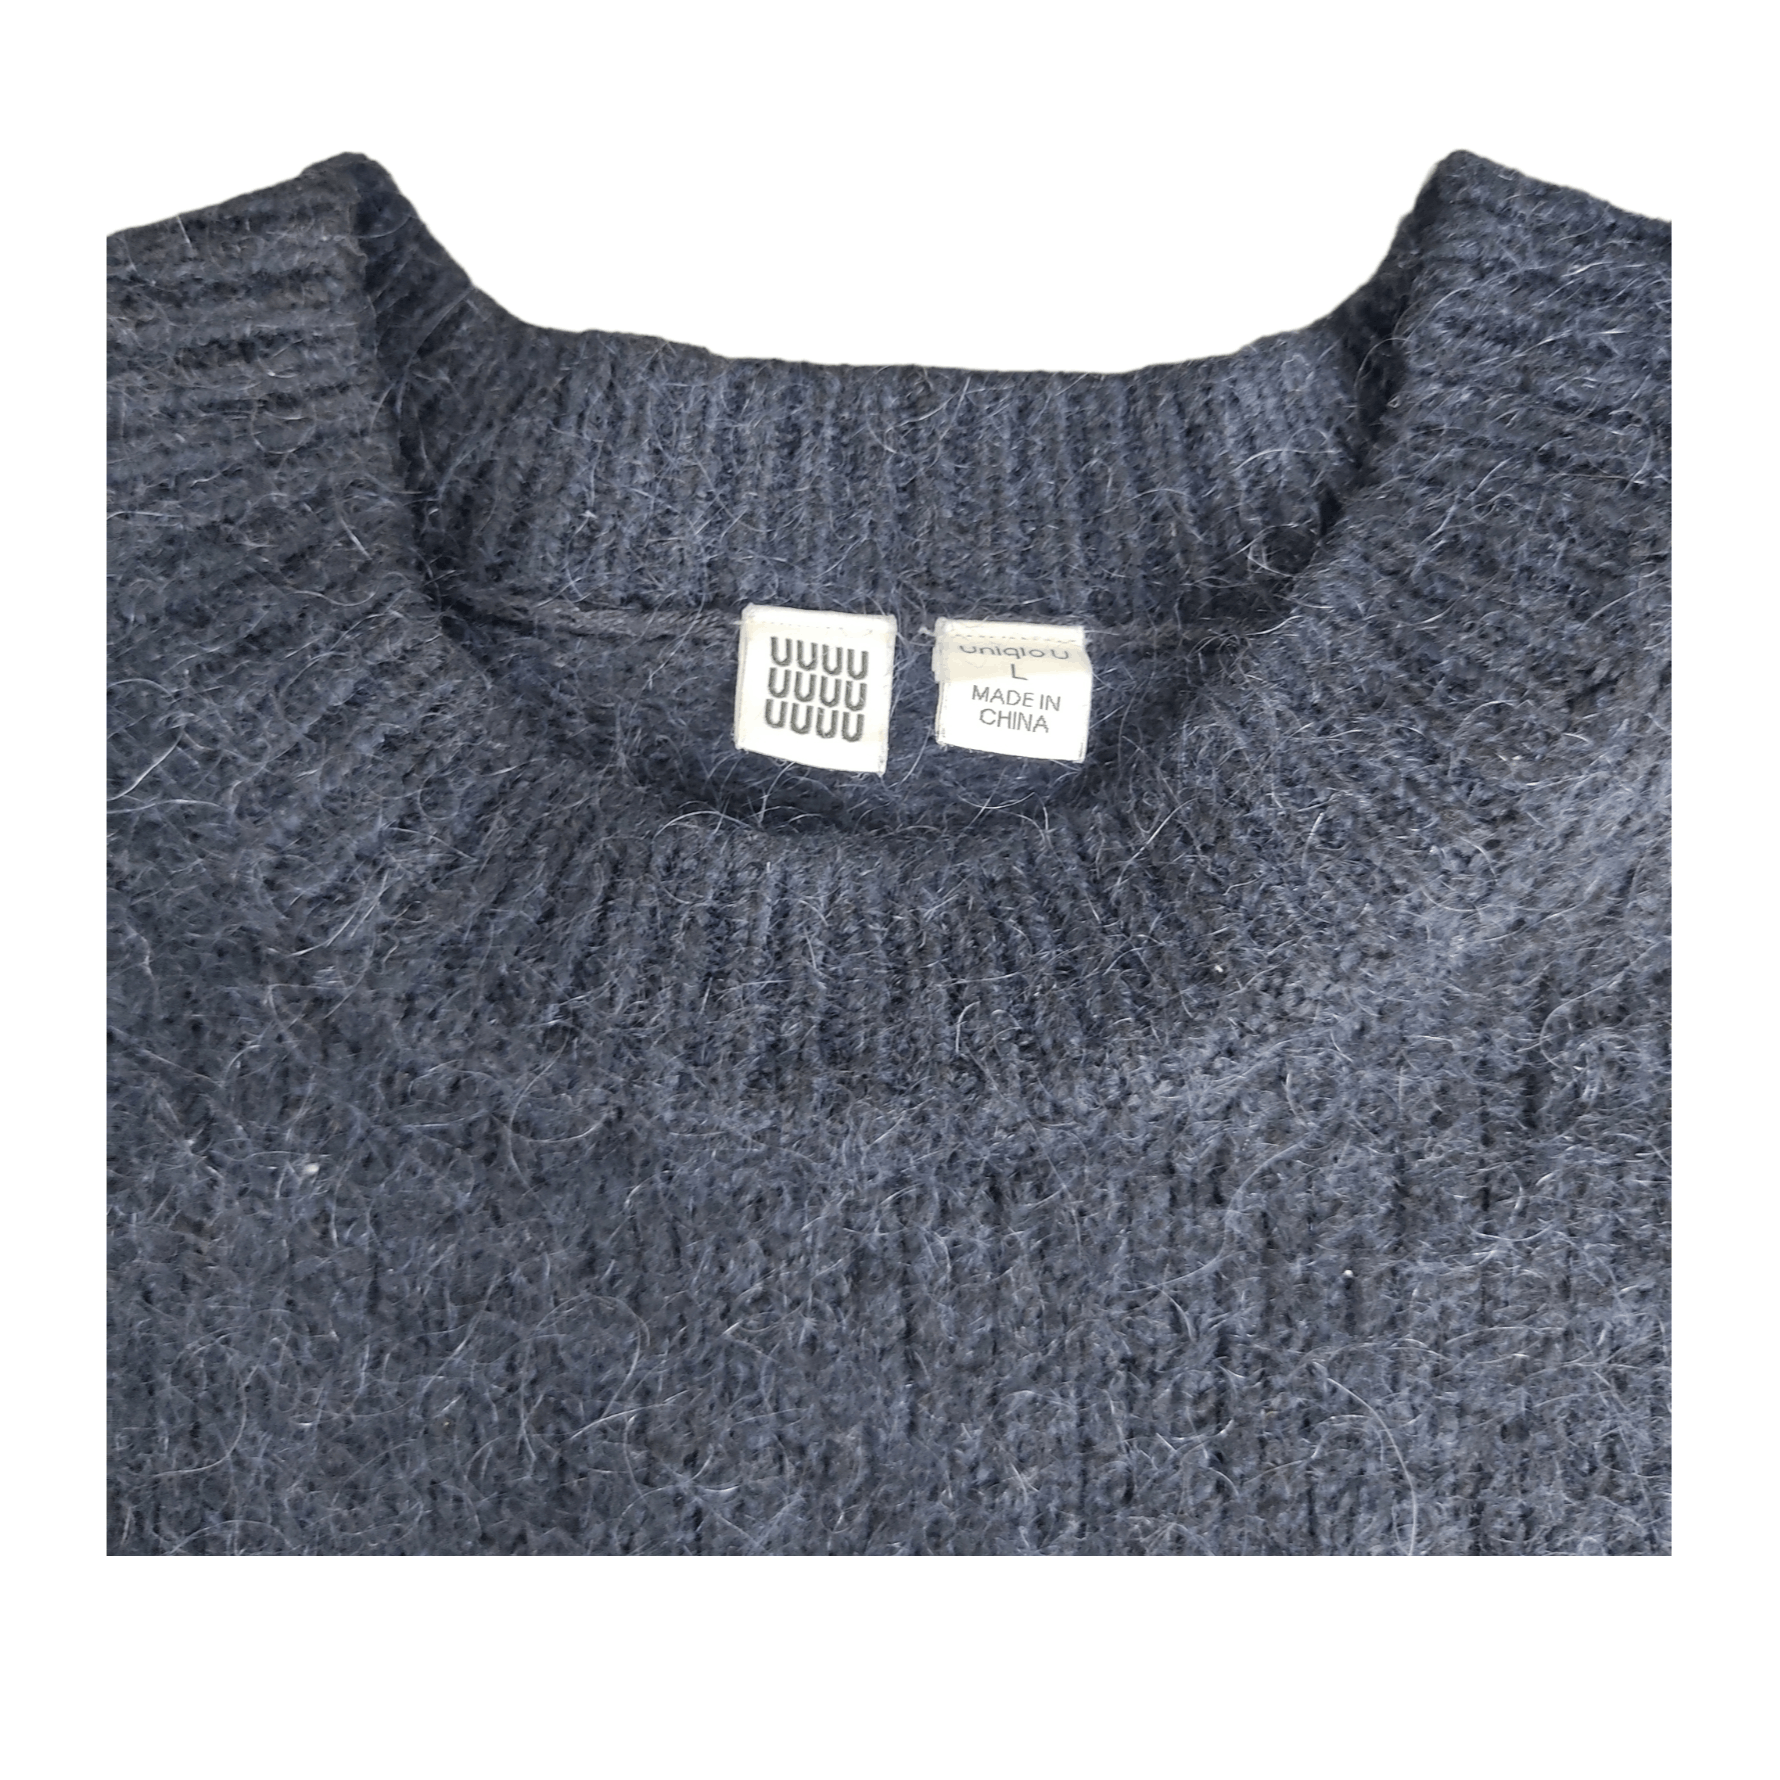 Uniqlo UUU x LEMAIRE Under Cover Mohair Wool Knitted Sweater - 5